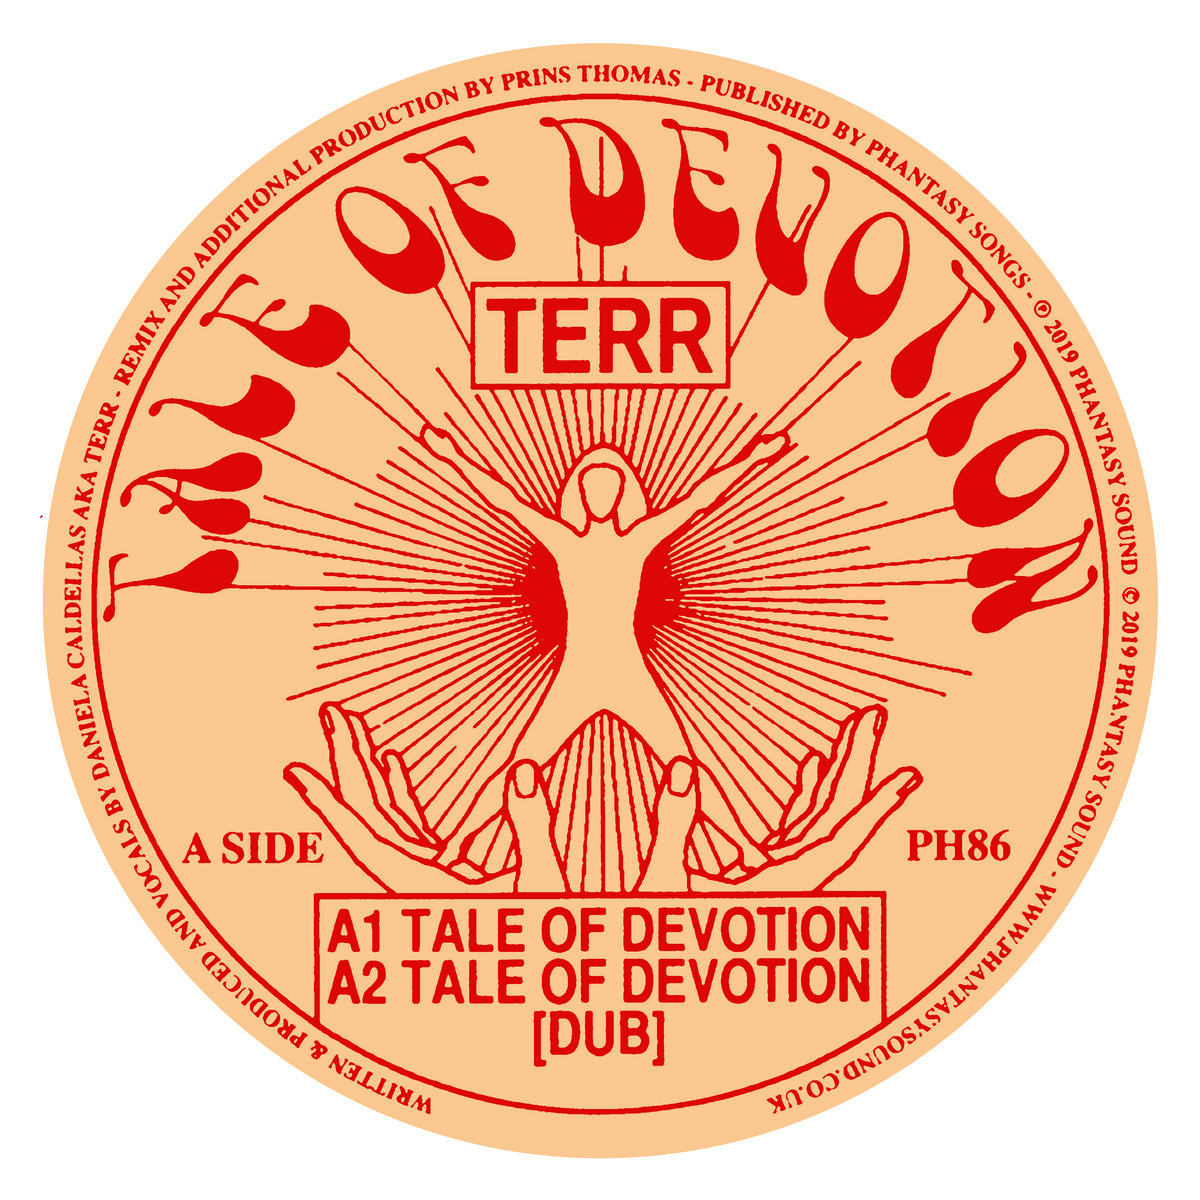 Terr – Tale of DevotionTerr is a Brazilian-born, Berlin-based artist. This came out on Phantasy a couple of years ago and is one of the best singles of recent times. The Prins Thomas mix is *chef’s kiss*